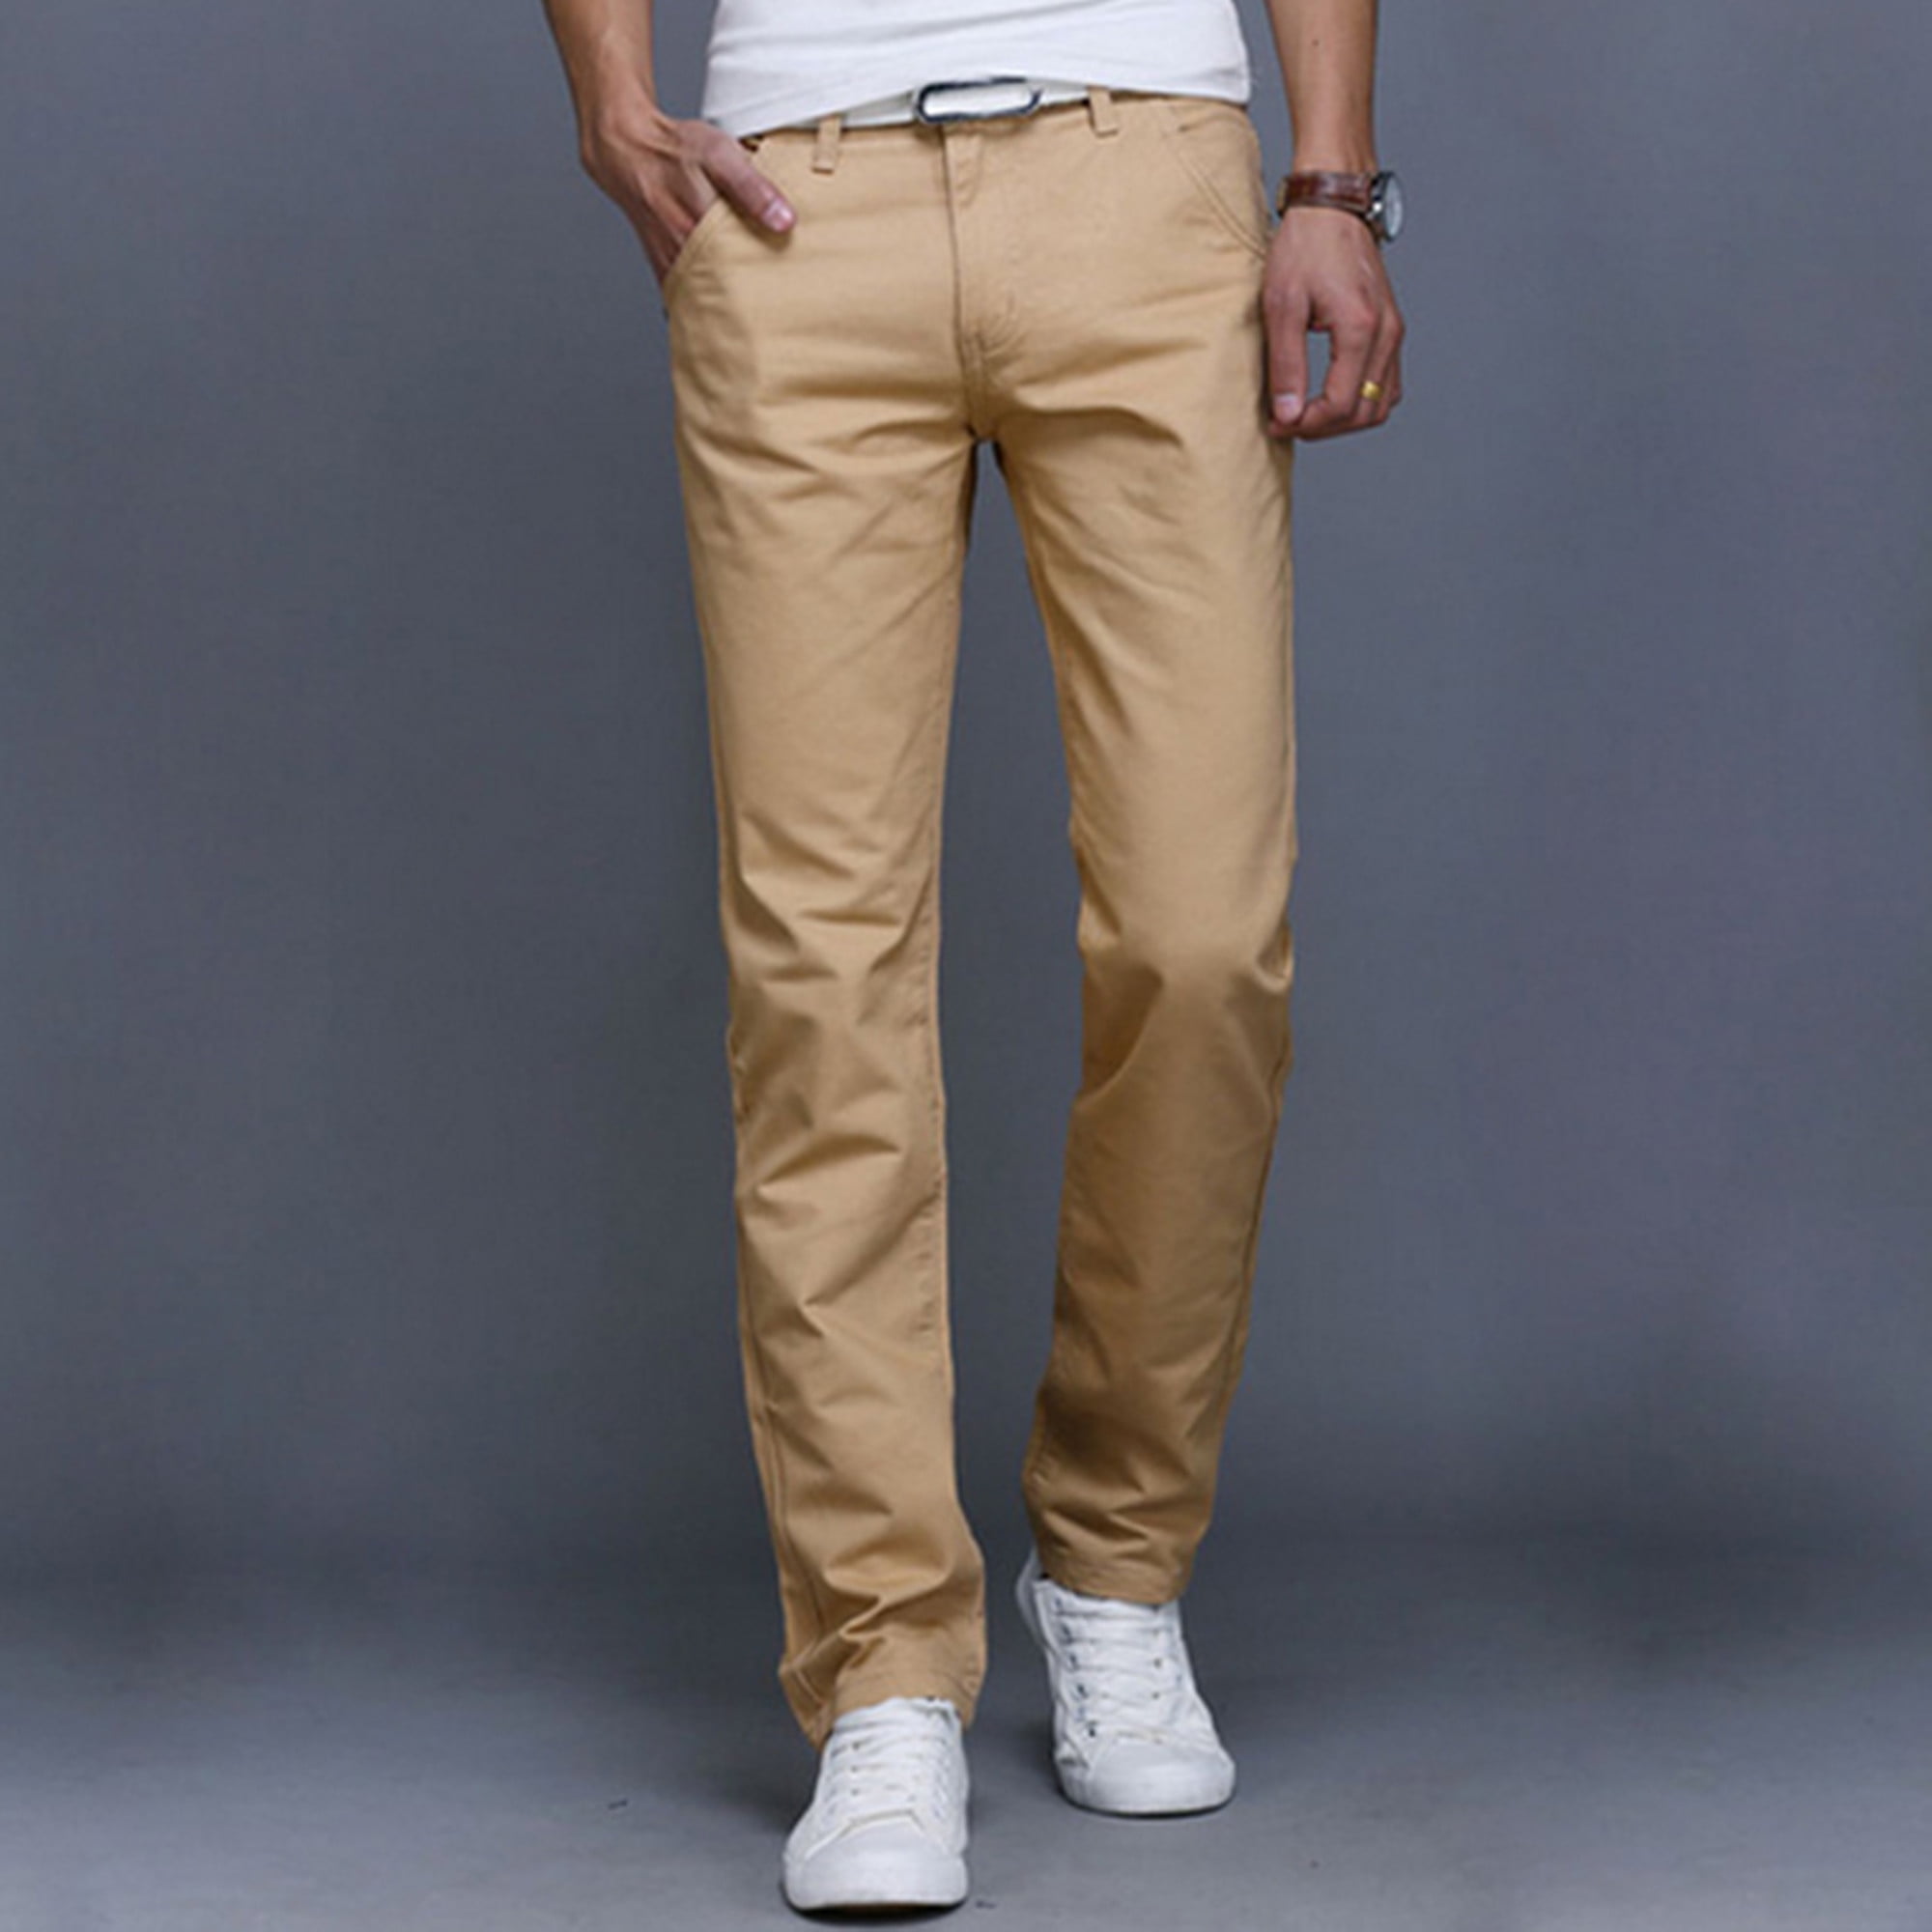 Mens Solid Chino Formal Work Slacks Casual Dress Pants Straight Pencil Trousers 